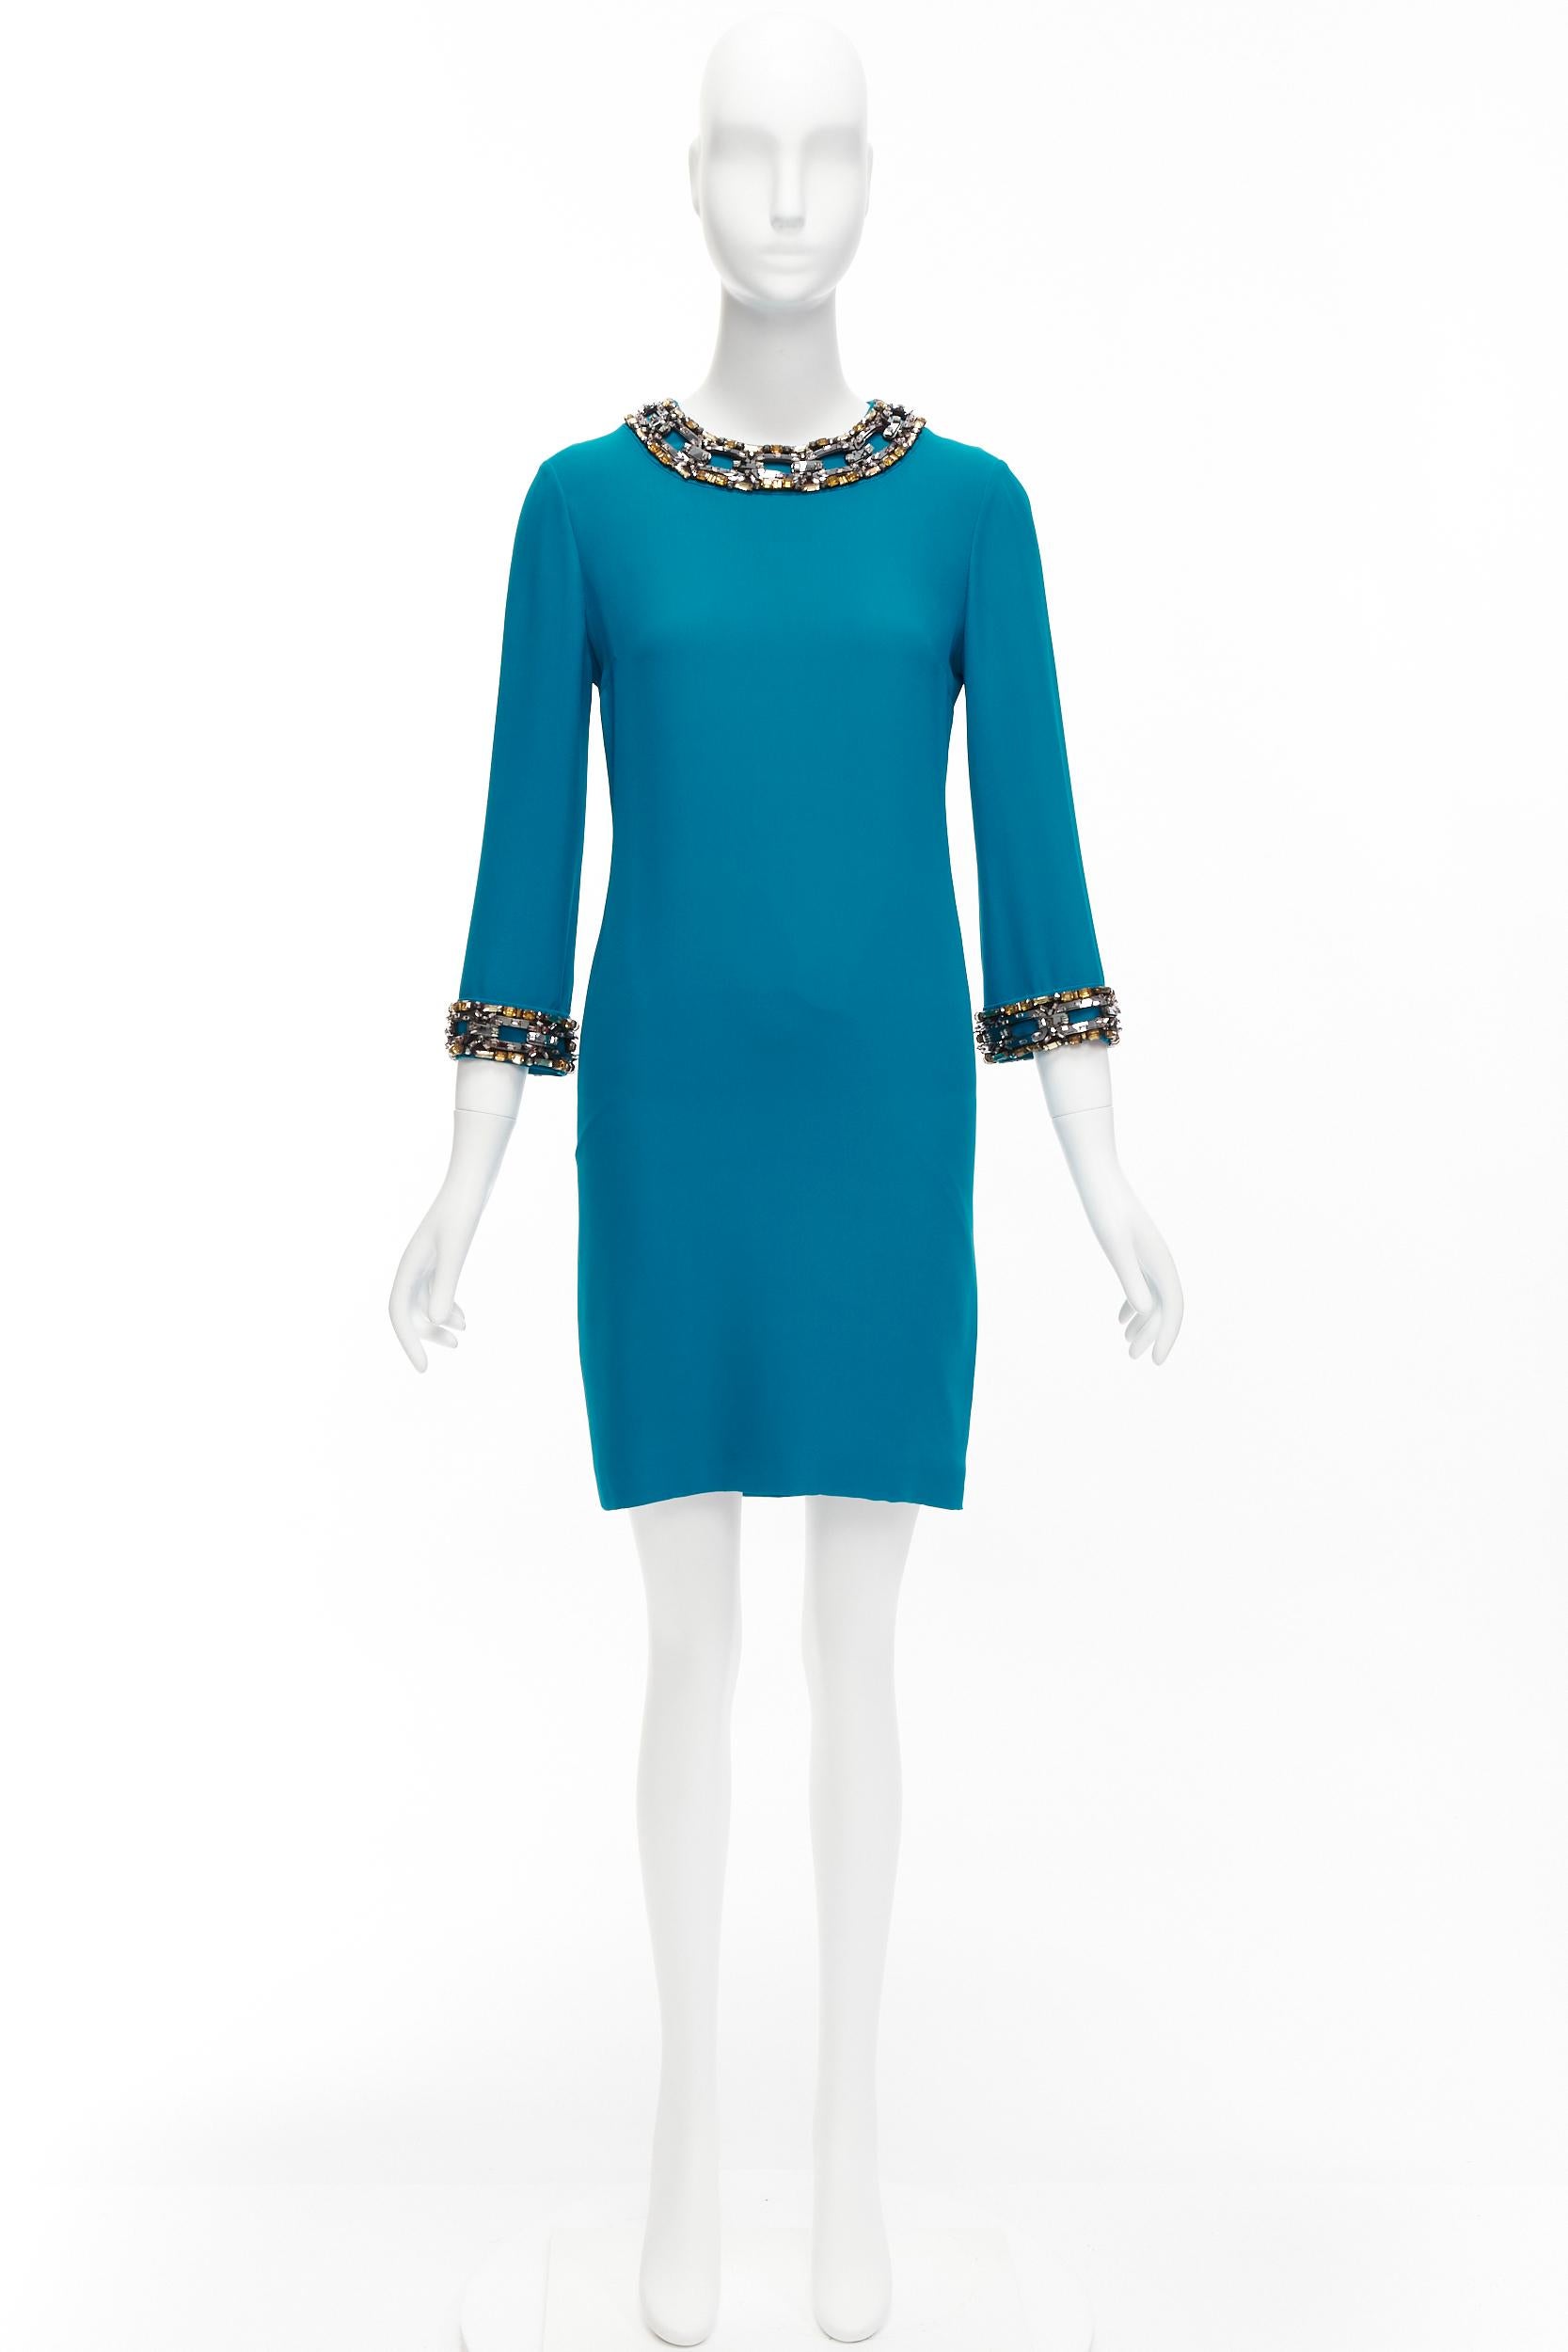 GUCCI teal blueyellow silver crystal chunky chain embellishment shift dress IT40 For Sale 5